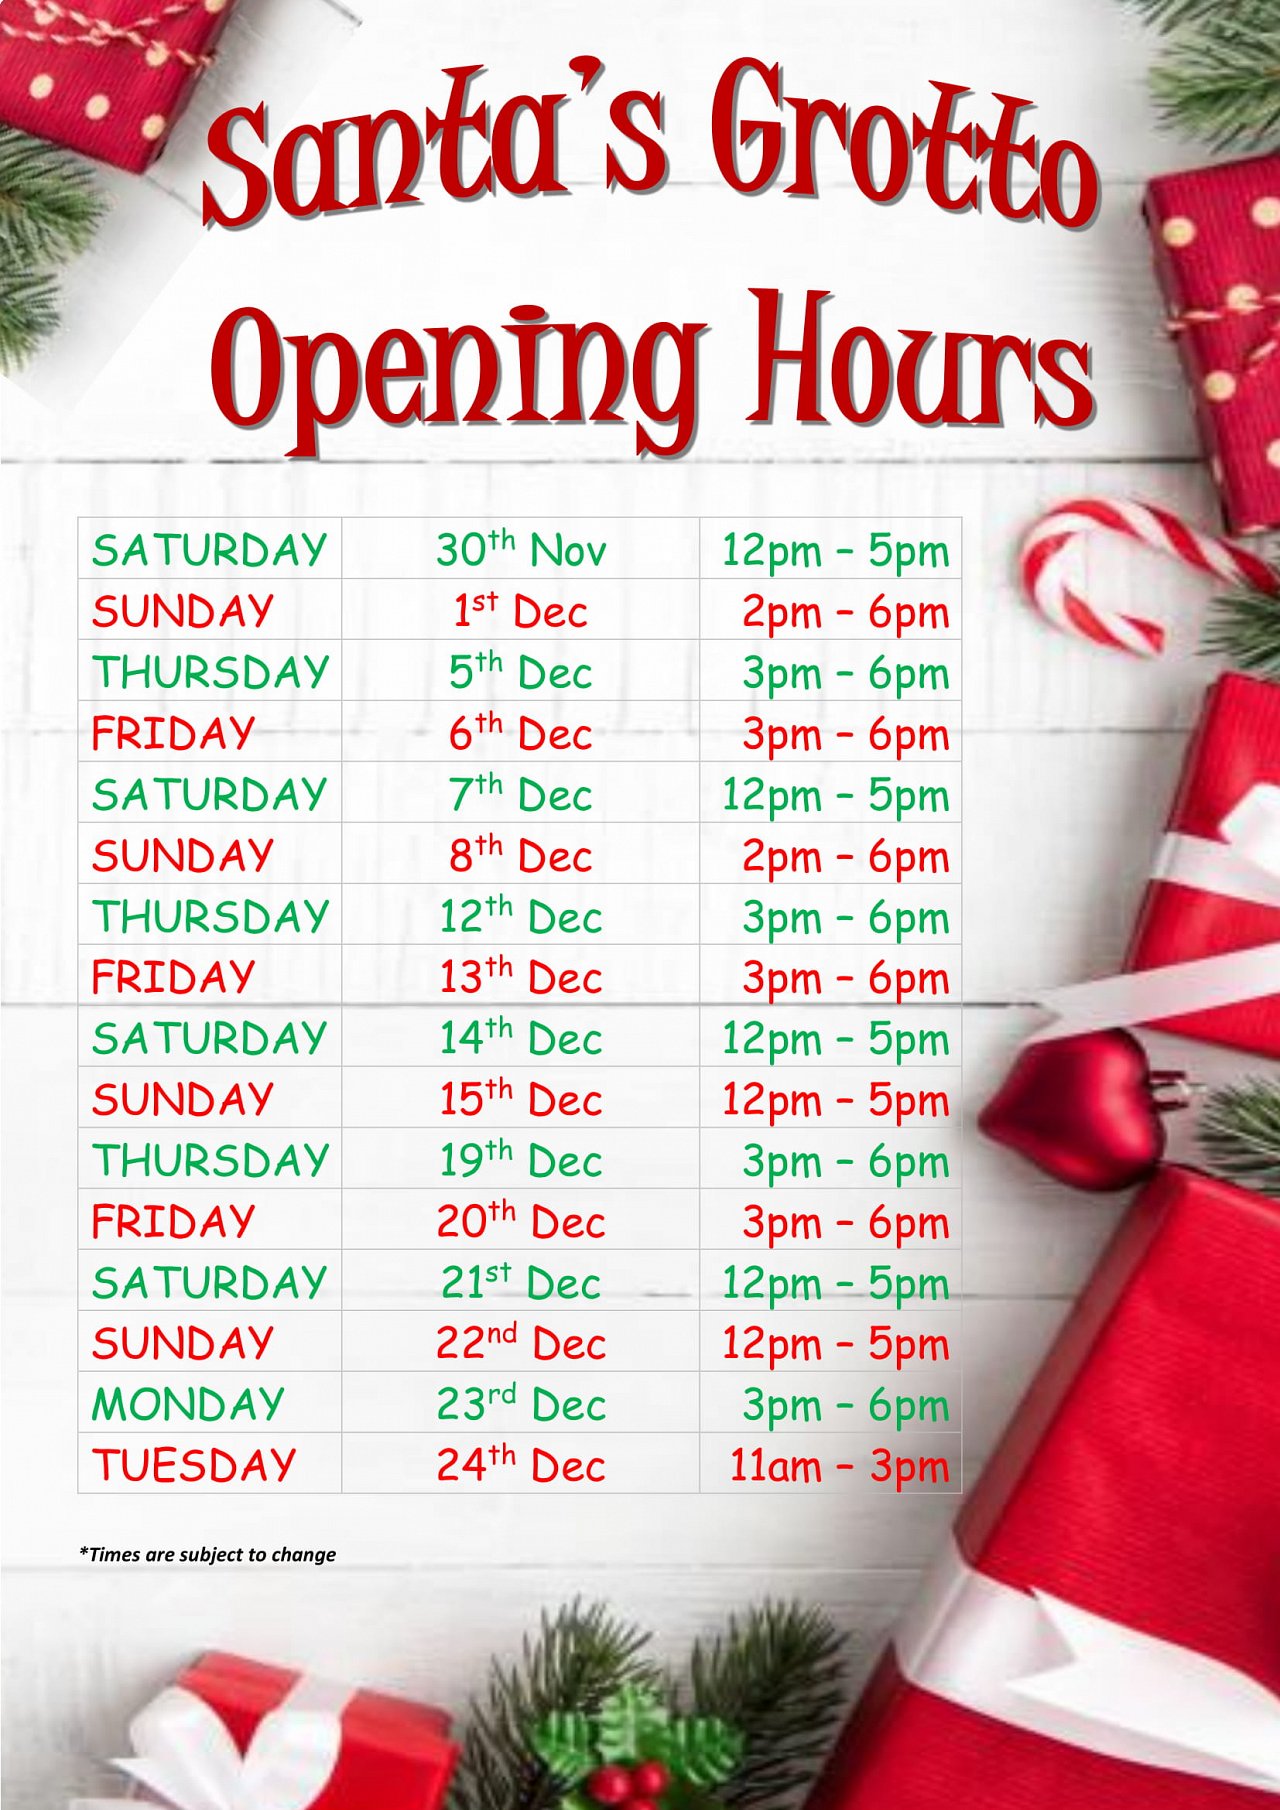 SANTA GROTTO OPENING HOURS